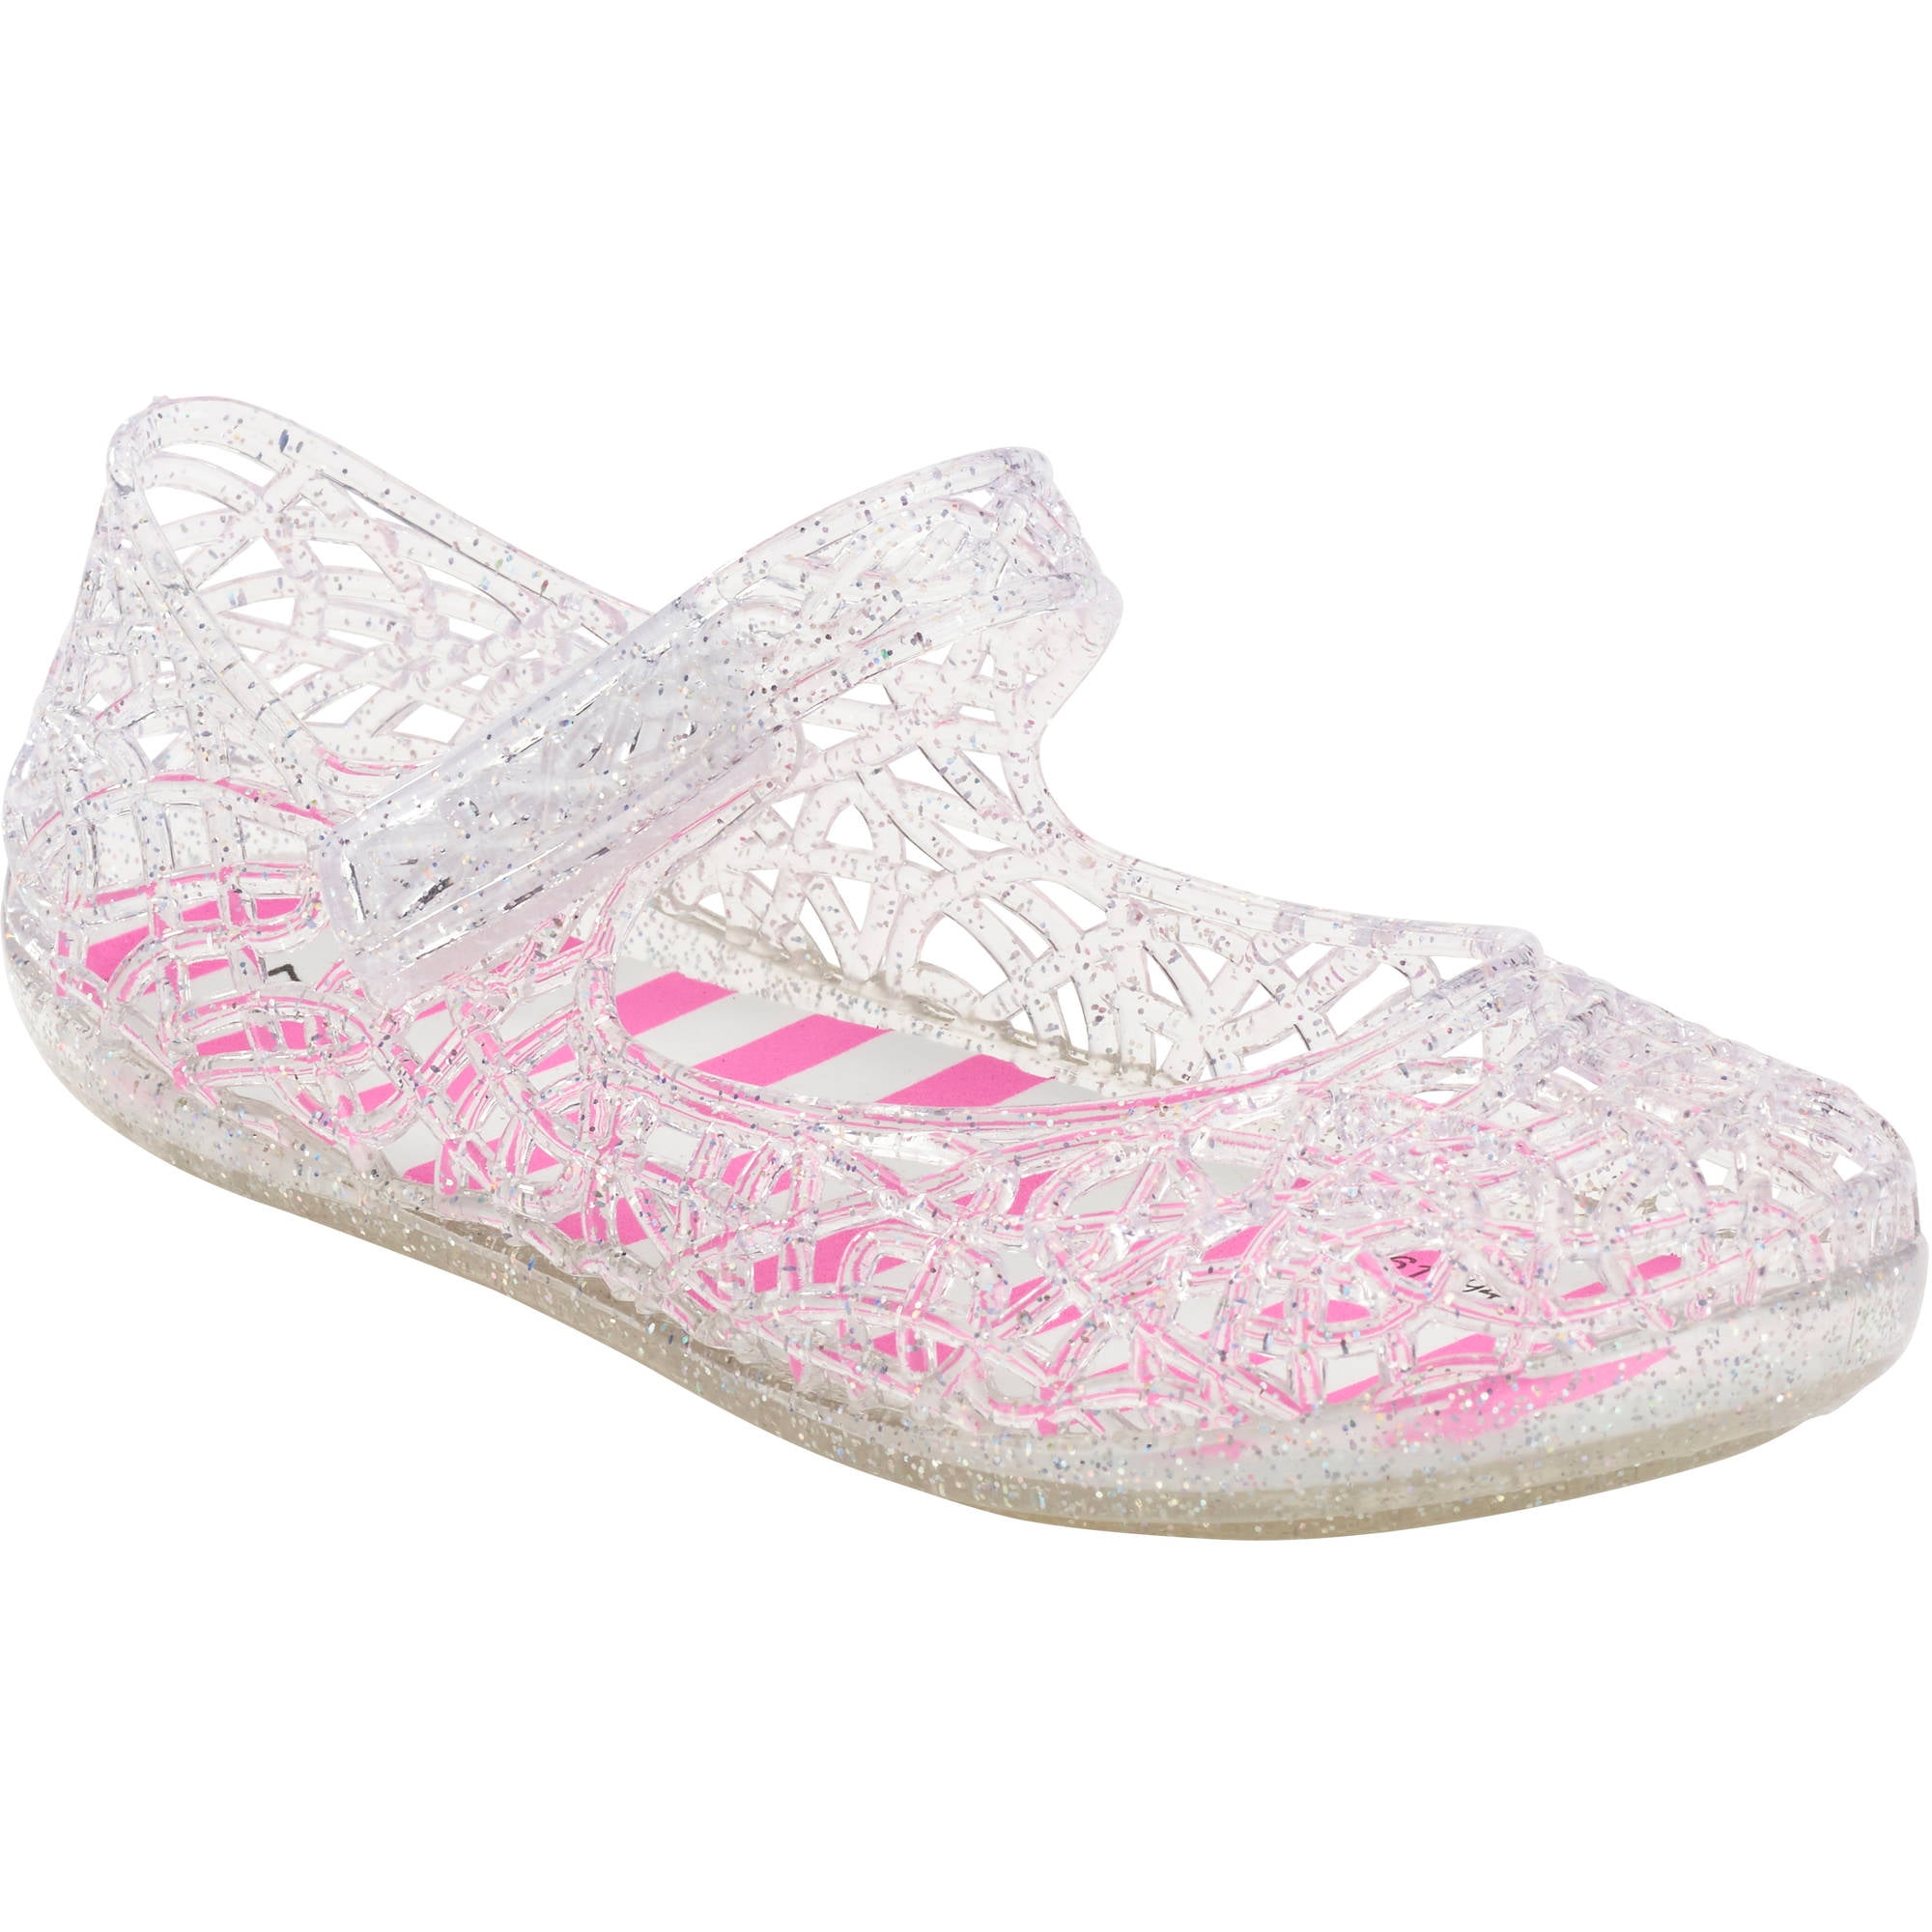 Baby Girls Sandals Mary Jane Clear Jelly Prewalk Shoes 2 3 4 5 6 12 